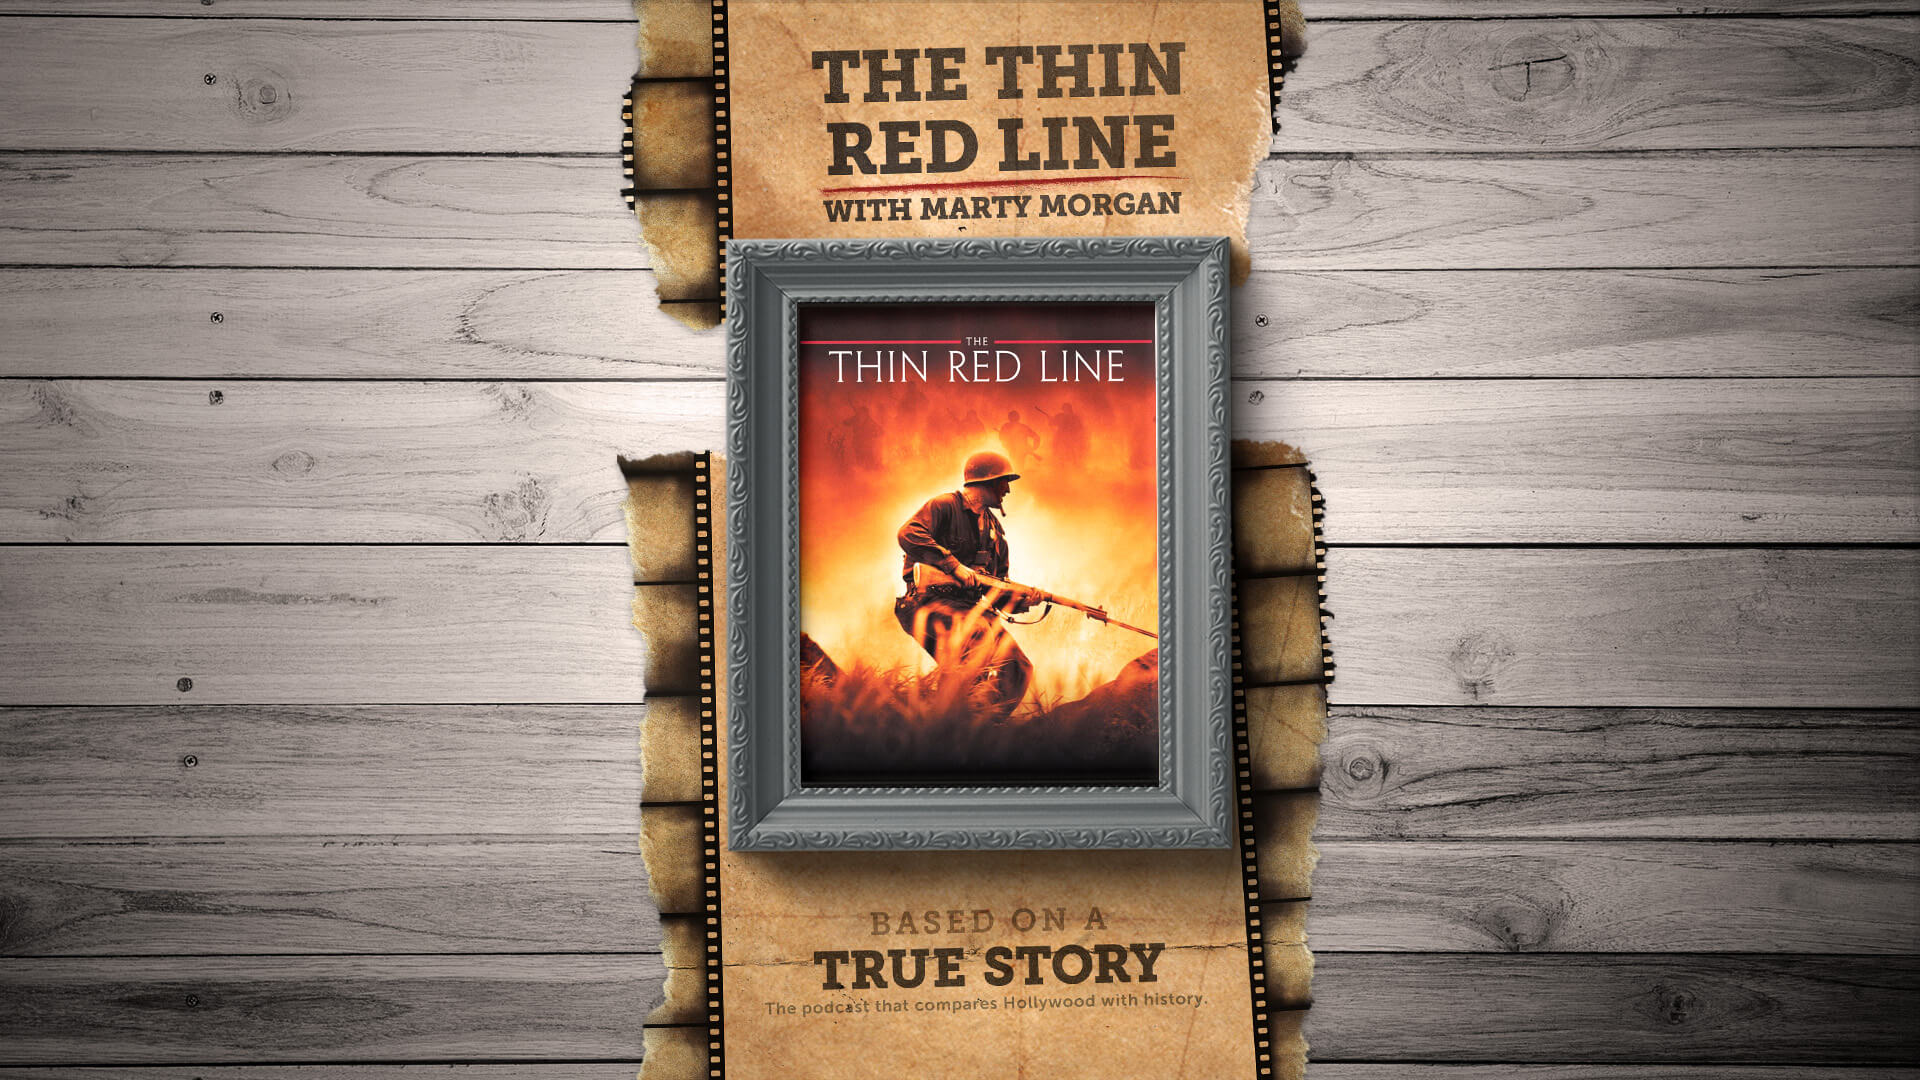 i live feudale film 256: The Thin Red Line with Marty Morgan | Based on a True Story Podcast